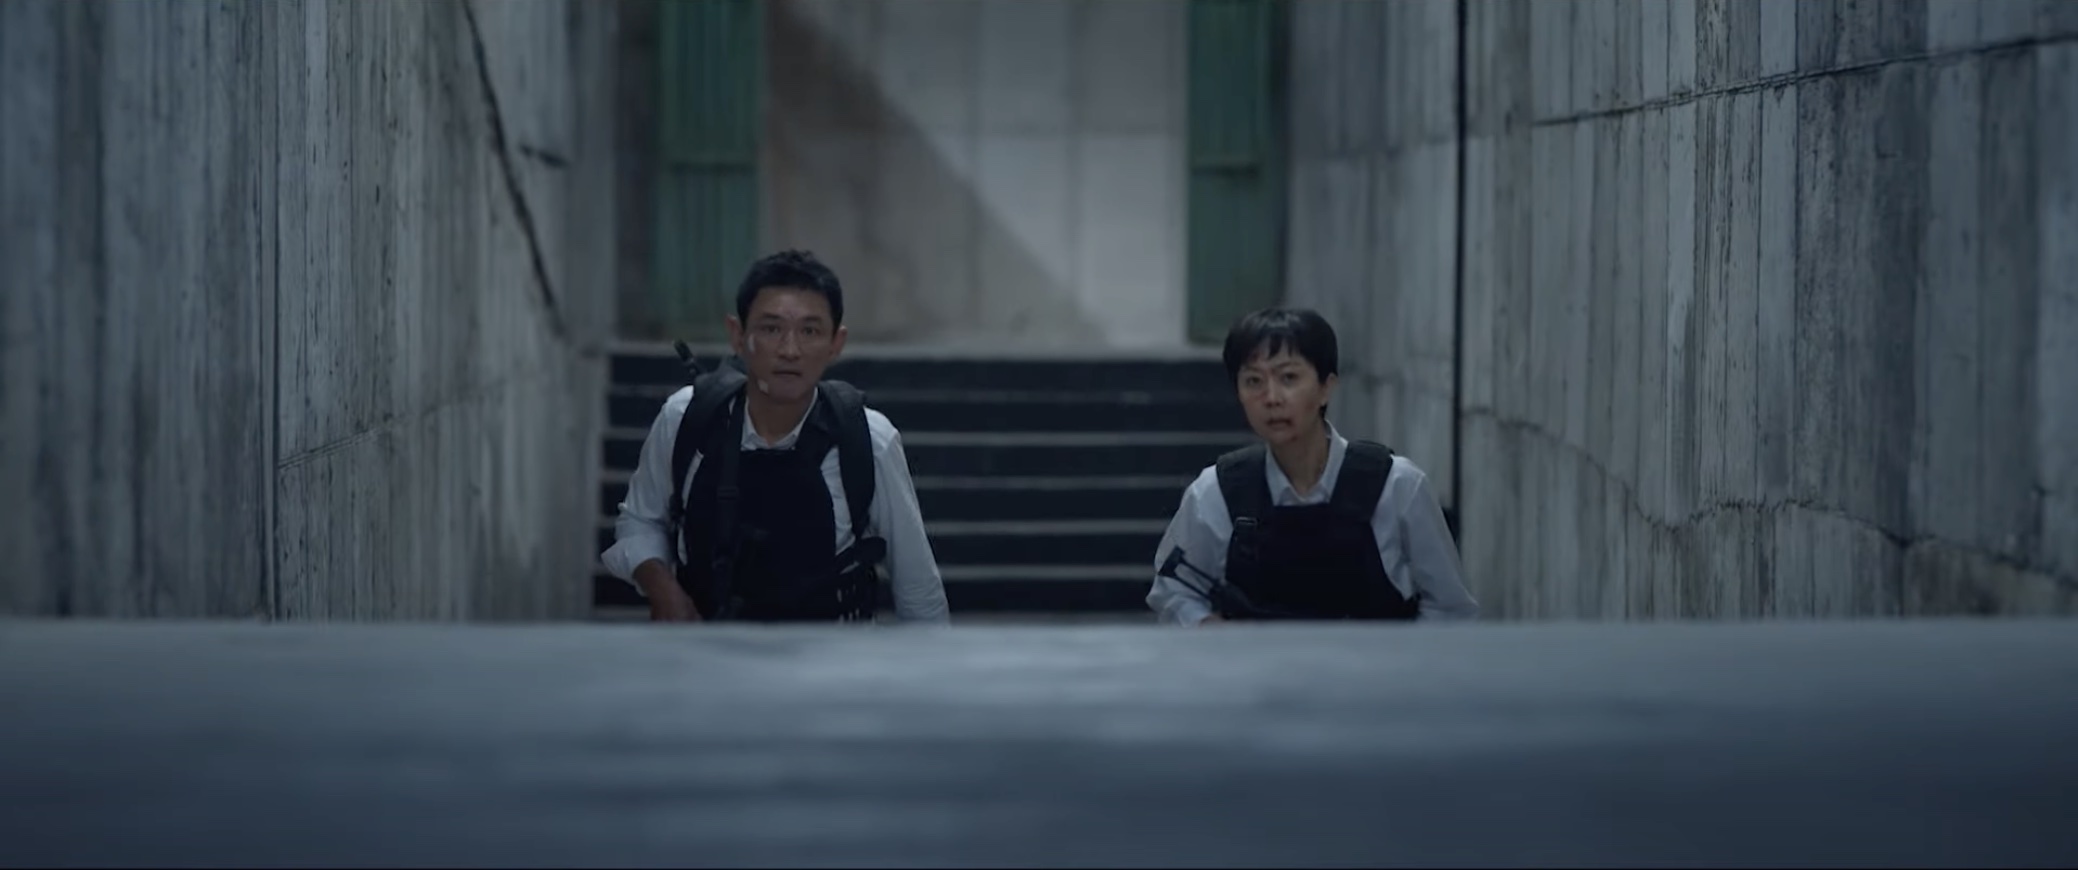 Hwang Jung-min, Yeom Jung-ah are spying spouses in film teaser